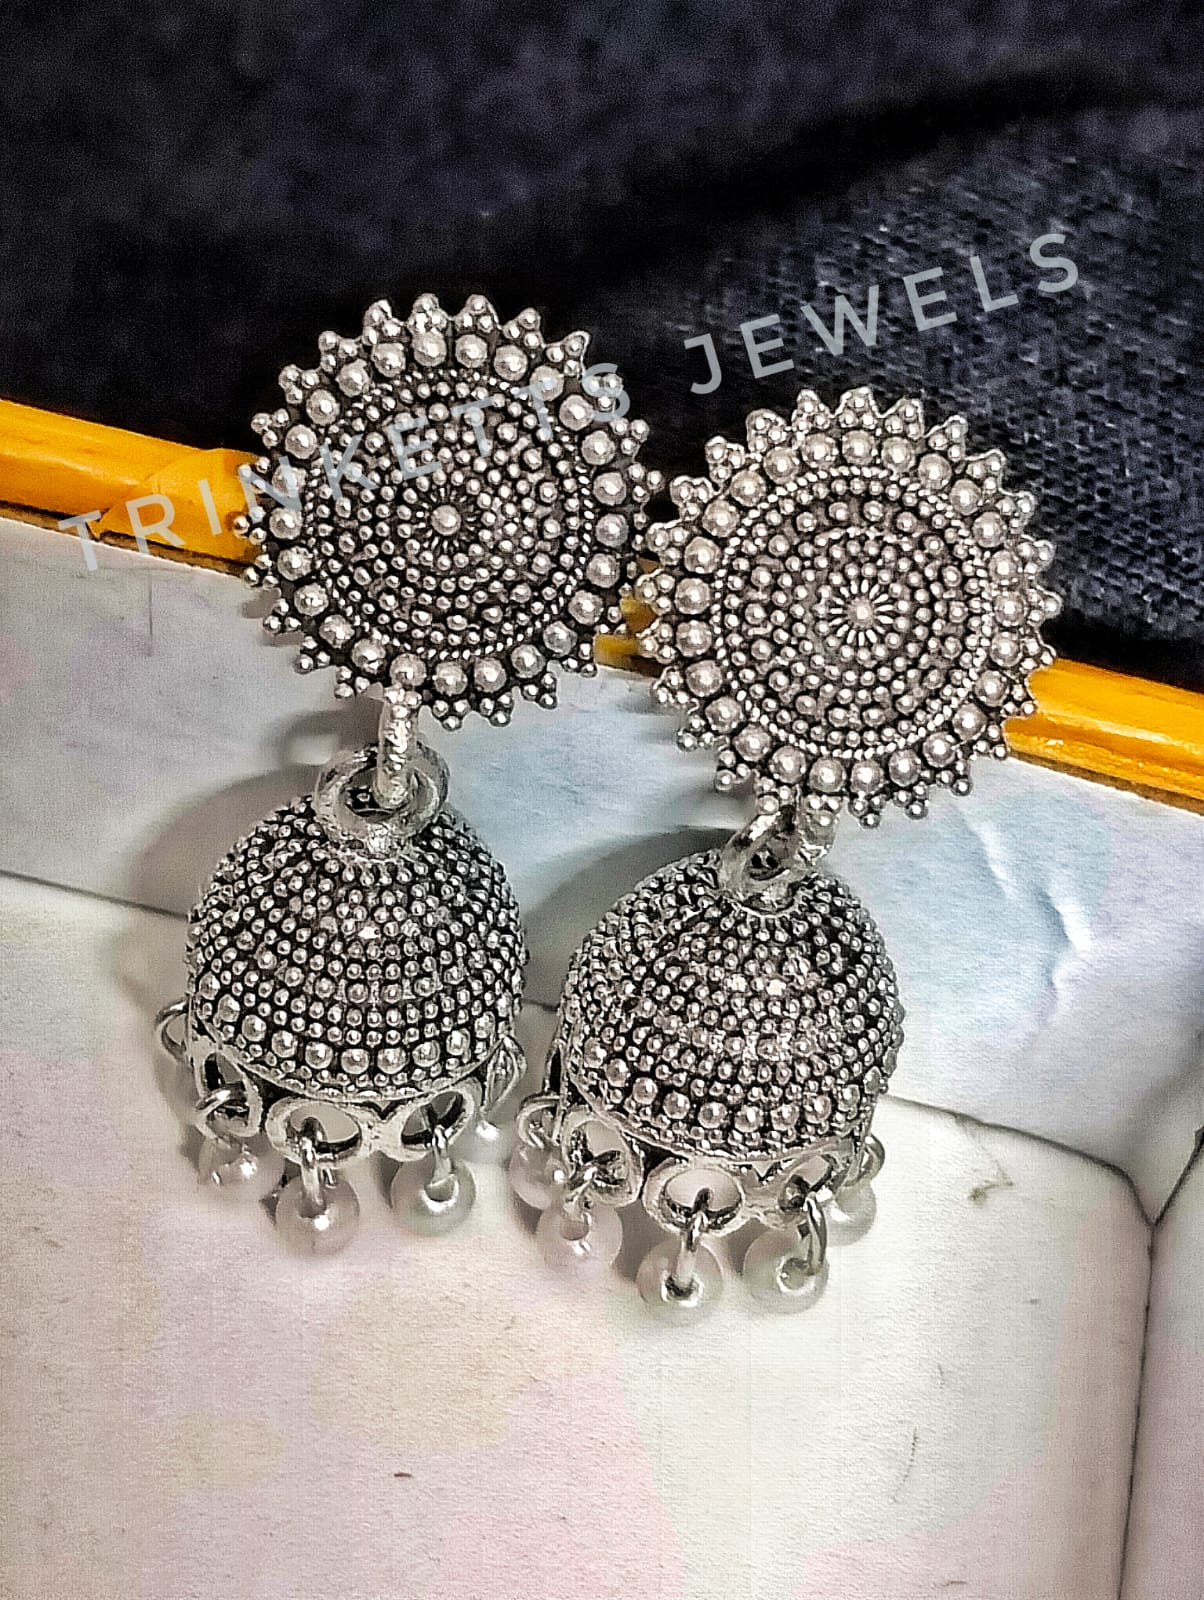 Oxidized silver metal Jhumki earrings, approximately 1.5 inches in size. The design features an intricate circular pattern with a hanging Jhumki plate adorned with white beads. Elegant and timeless, these Jhumkis add a touch of Indian charm to your style